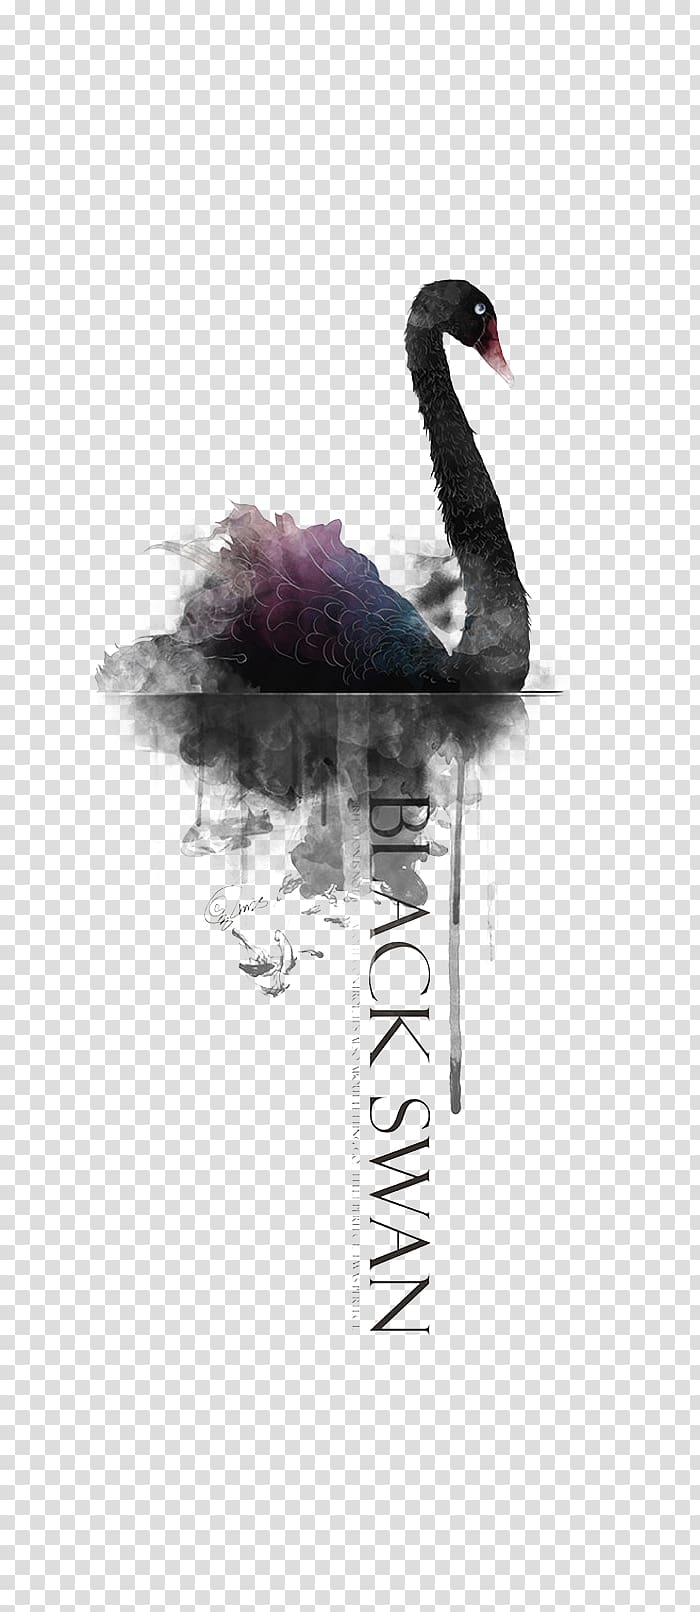 Black swan Oil painting Poster, Ink Black Swan transparent background PNG clipart